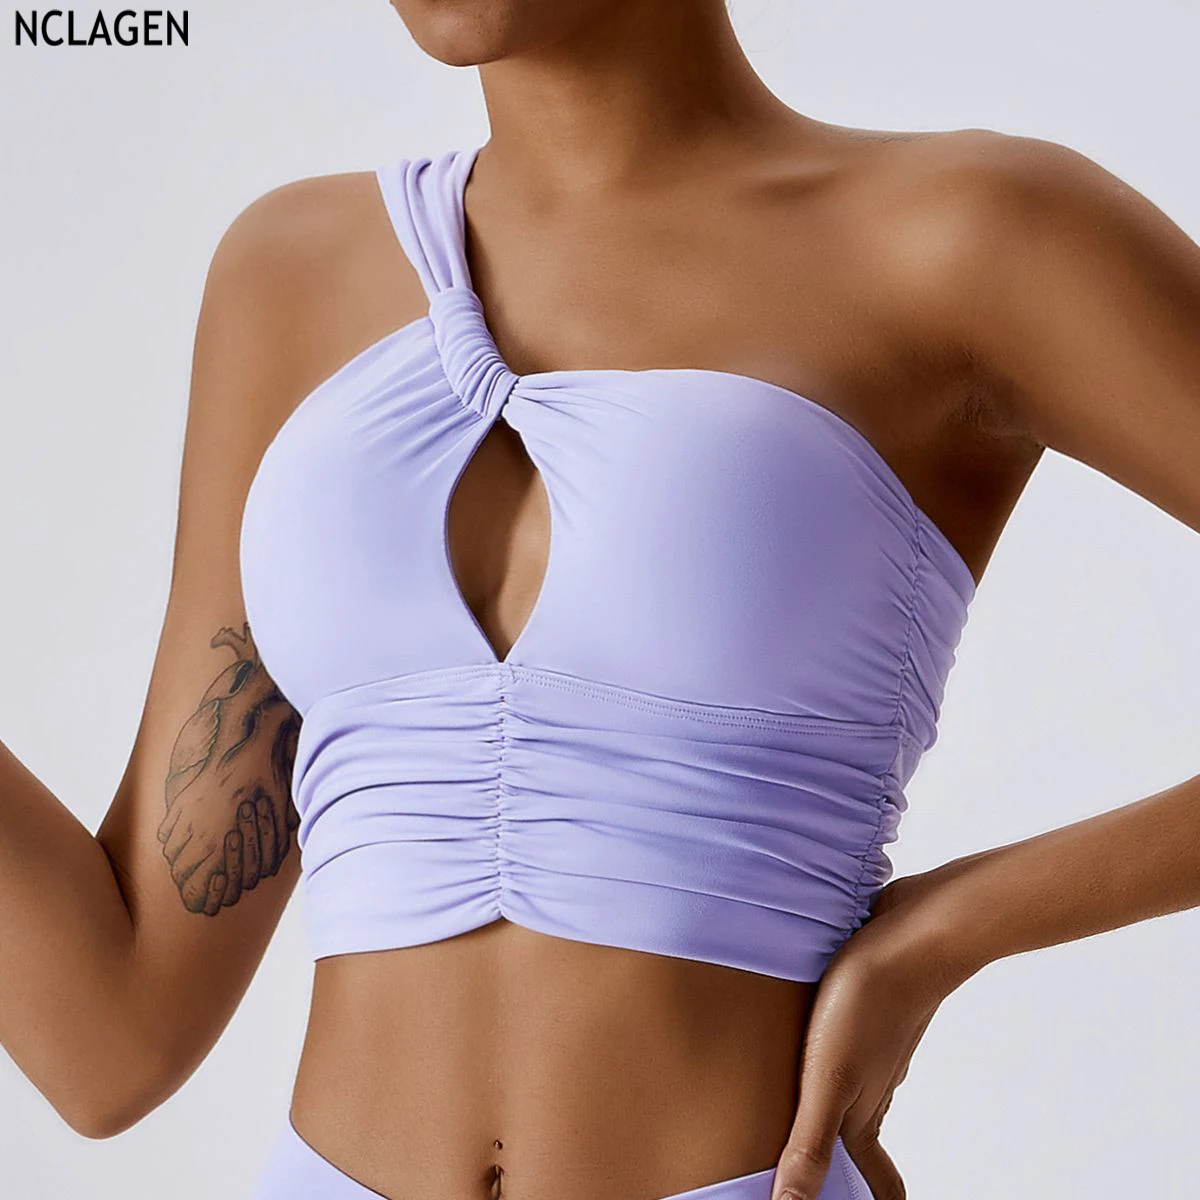 

NCLAGEN Women Yoga Bra Sports Outdoor Running Fitness Vest Gym Sexy Breathable Halter High Elastic Stretchy Dry Fit Crop Top